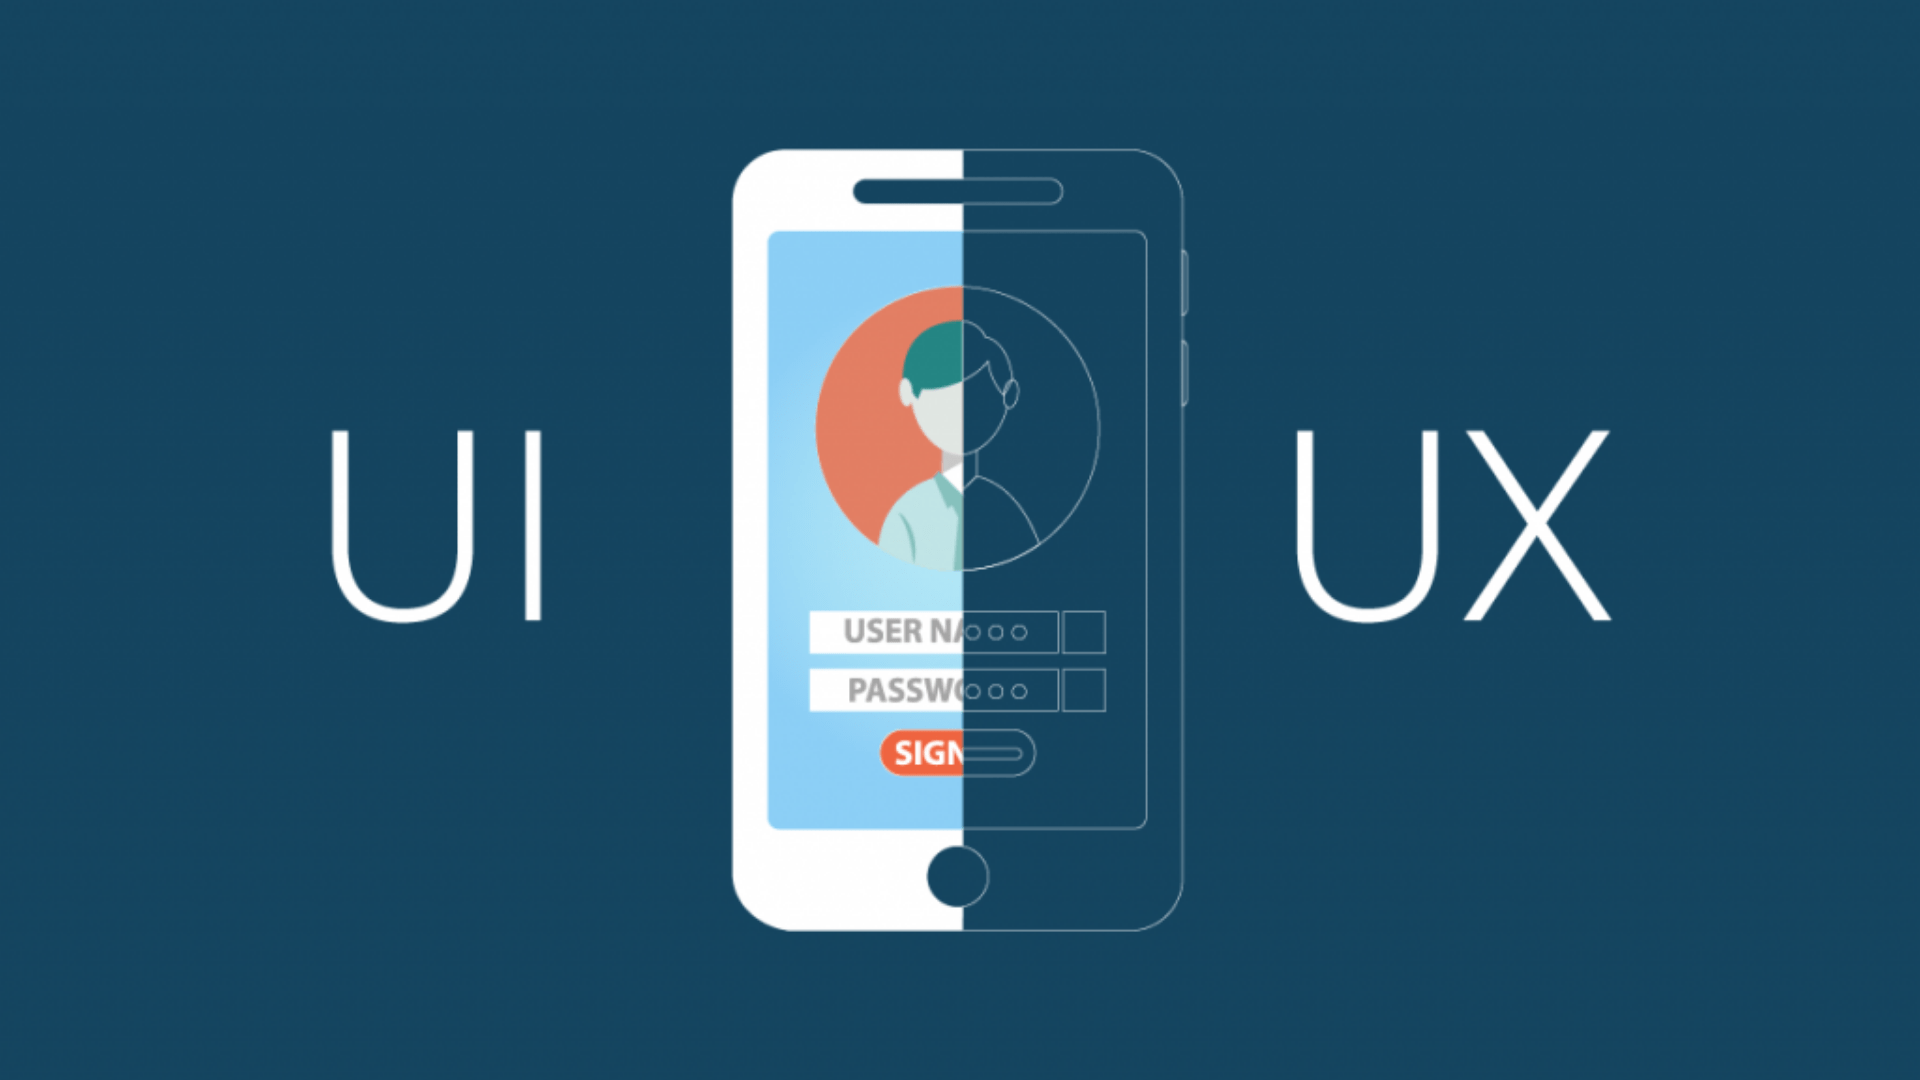 Important things to know about UX design